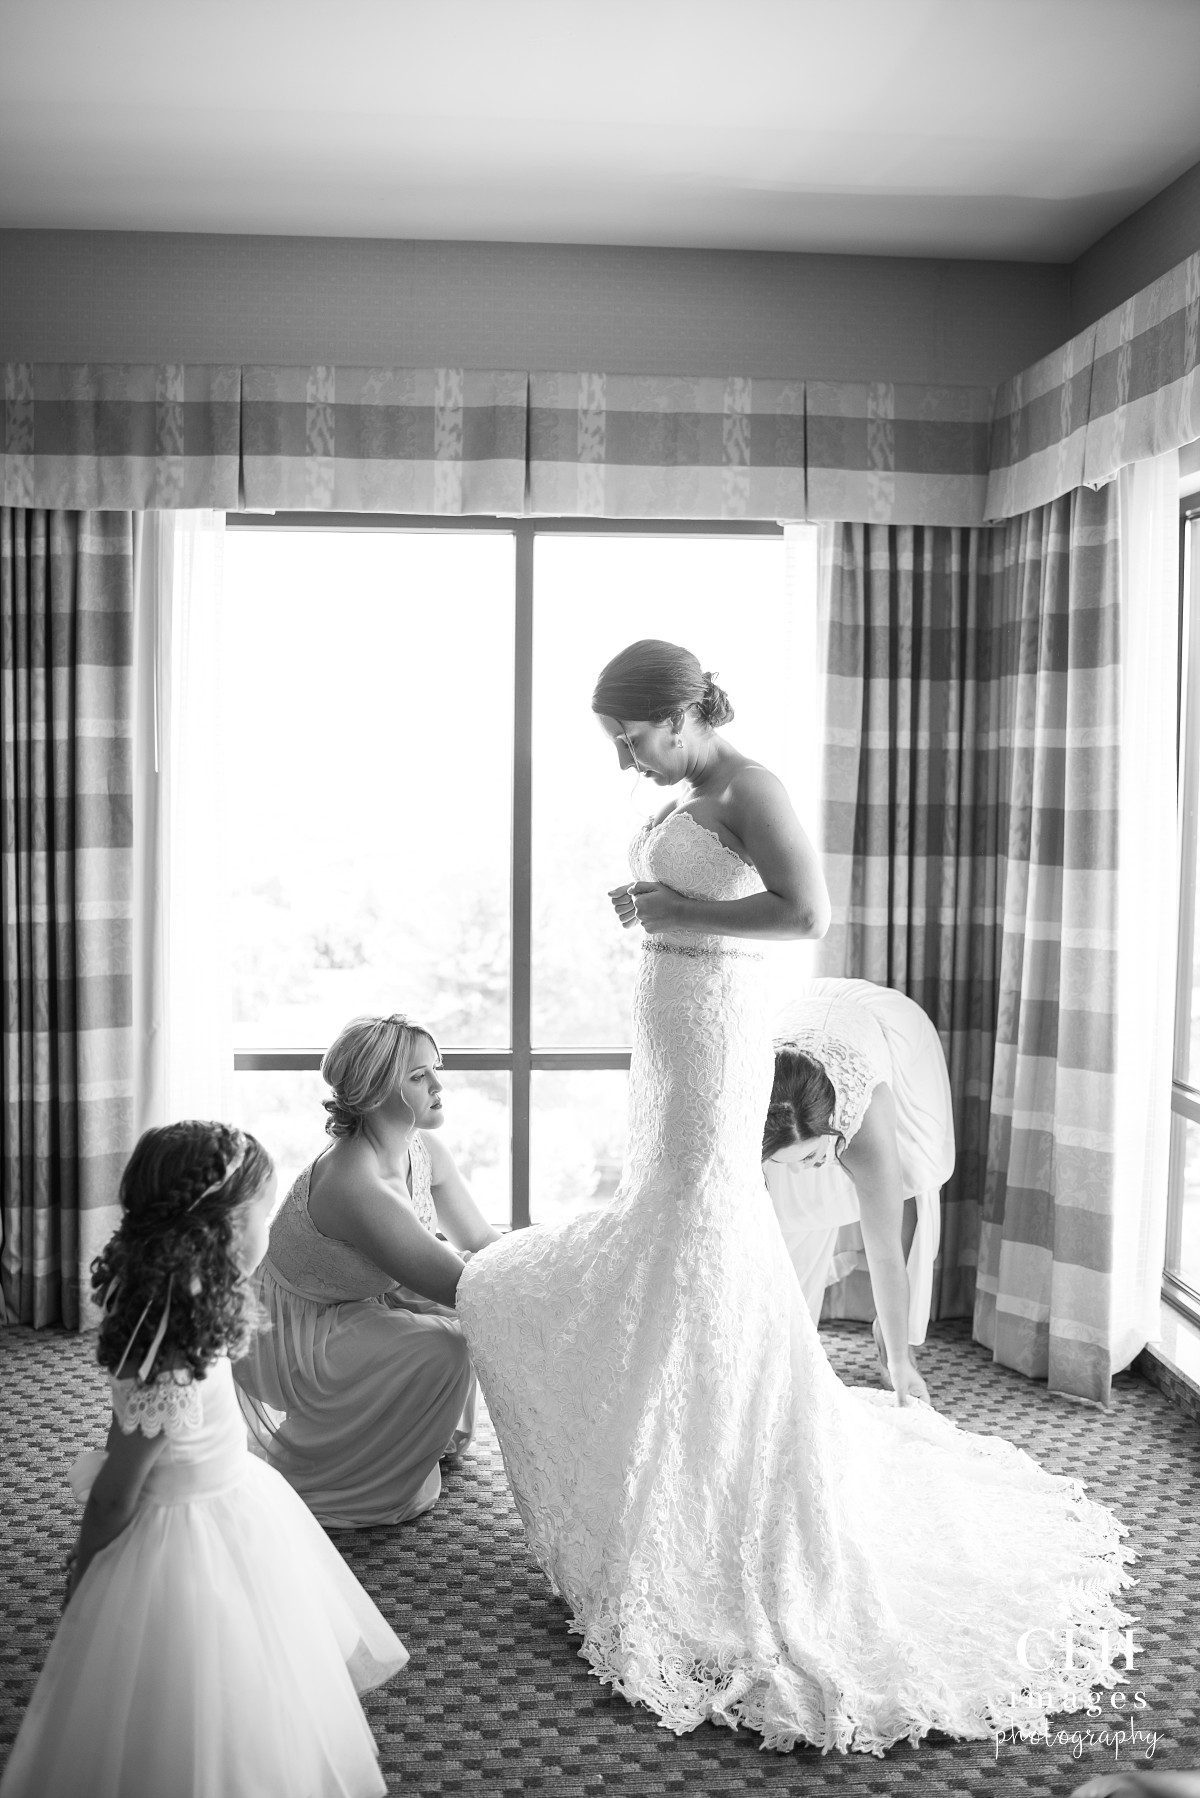 clh-images-photography-ashley-and-rob-day-wedding-revolution-hall-wedding-troy-ny-wedding-photography-47